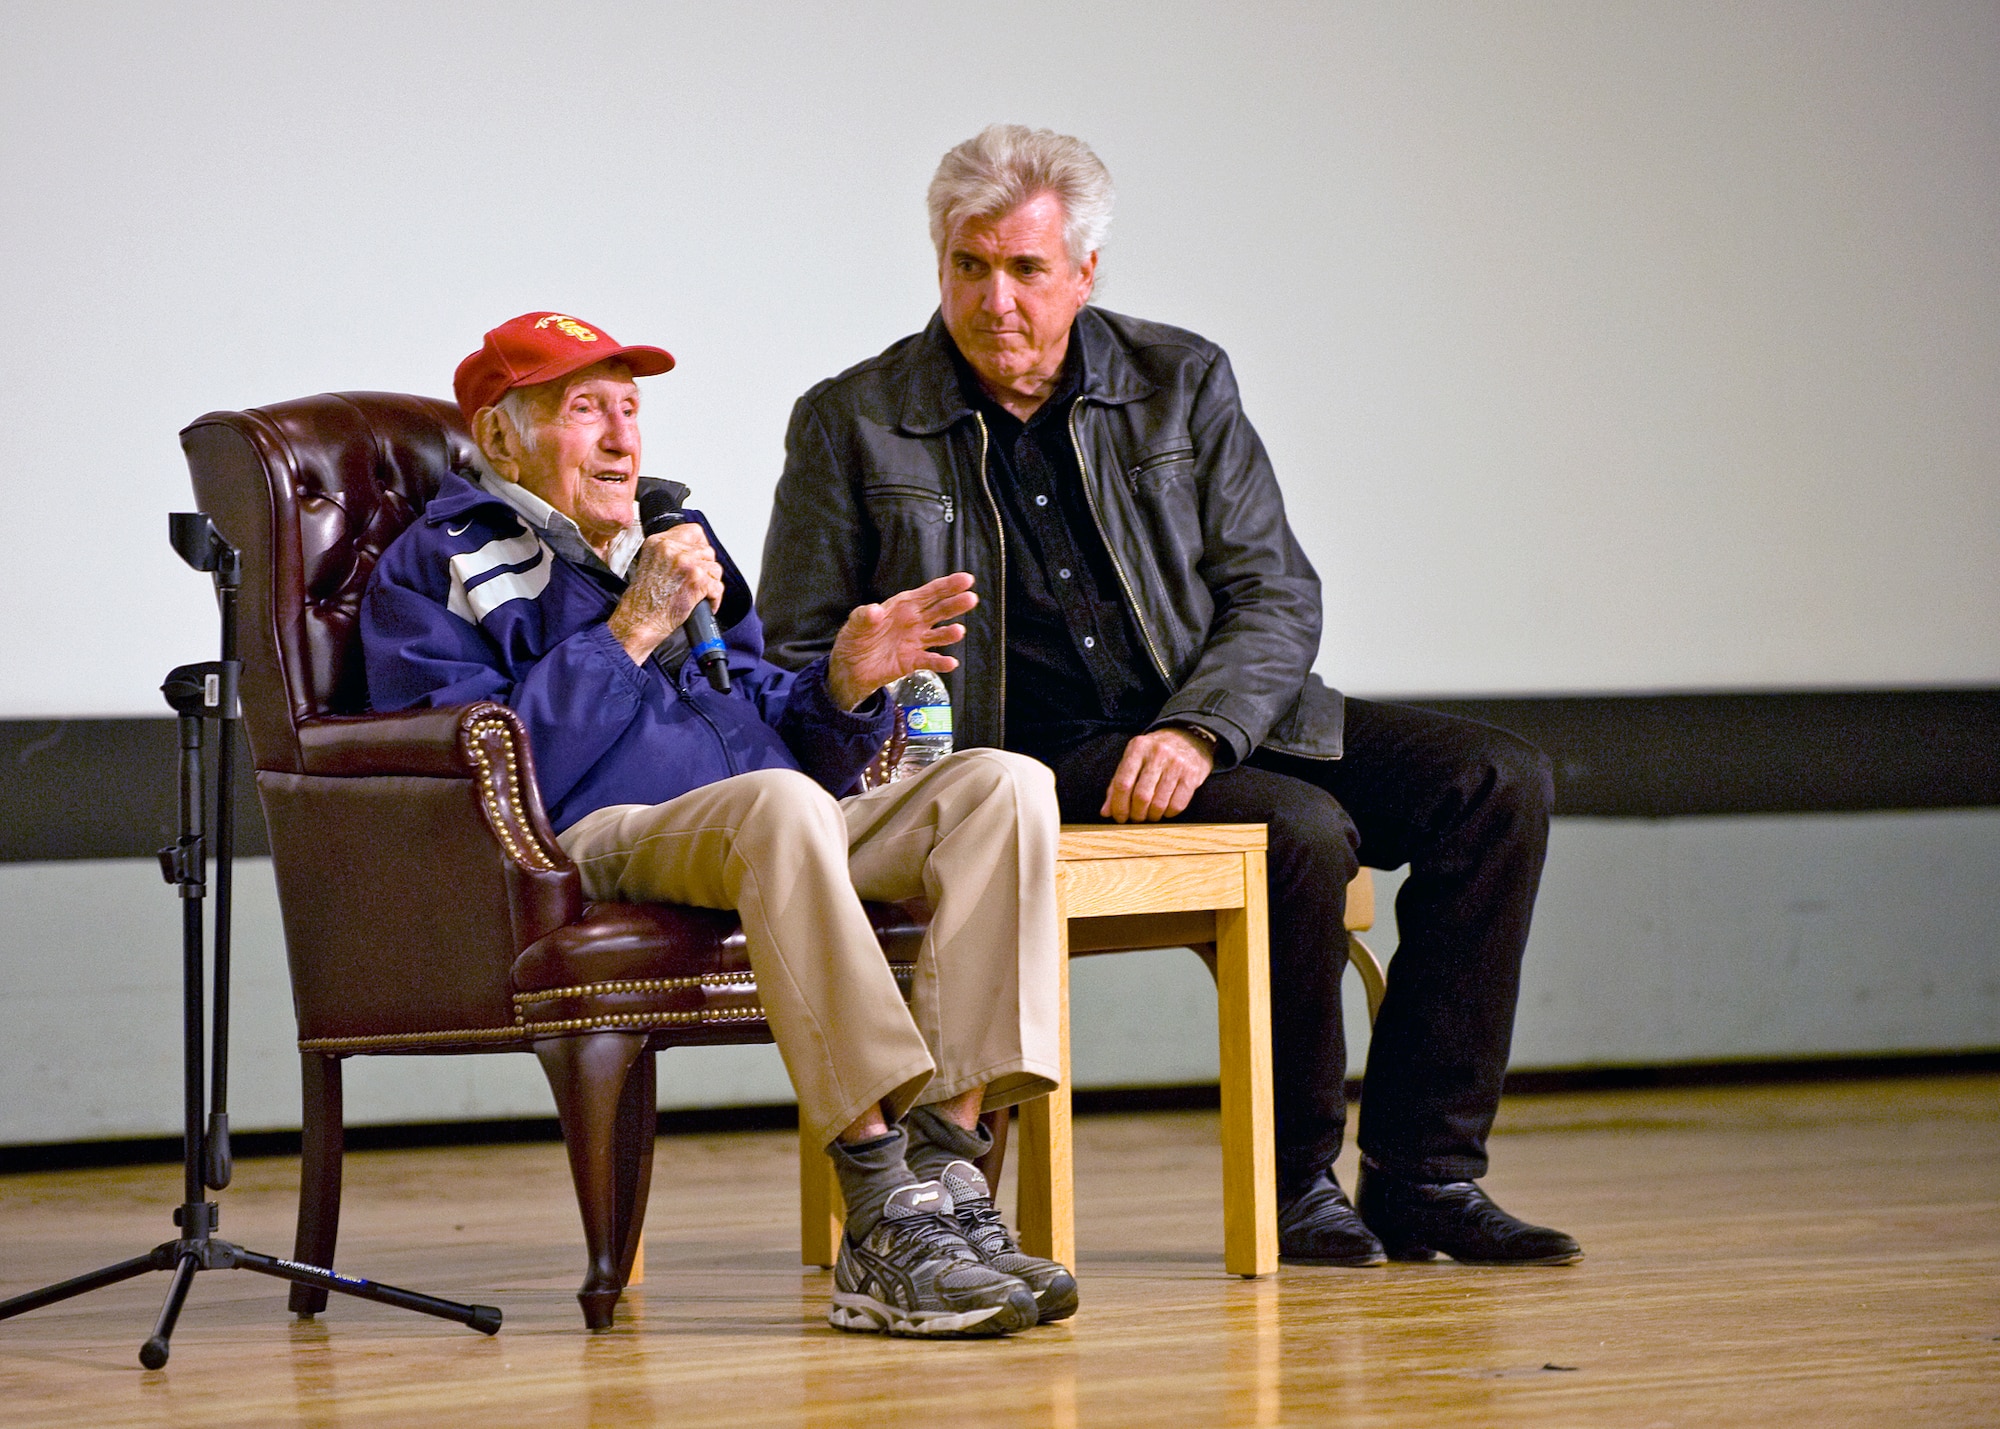 Louis Zamperini (left) with his son, Luke, answer questions during resilience training during the Wingman Day event held at the Base Theater Dec. 10, 2012. (U.S. Air Force photo by Edward Cannon)